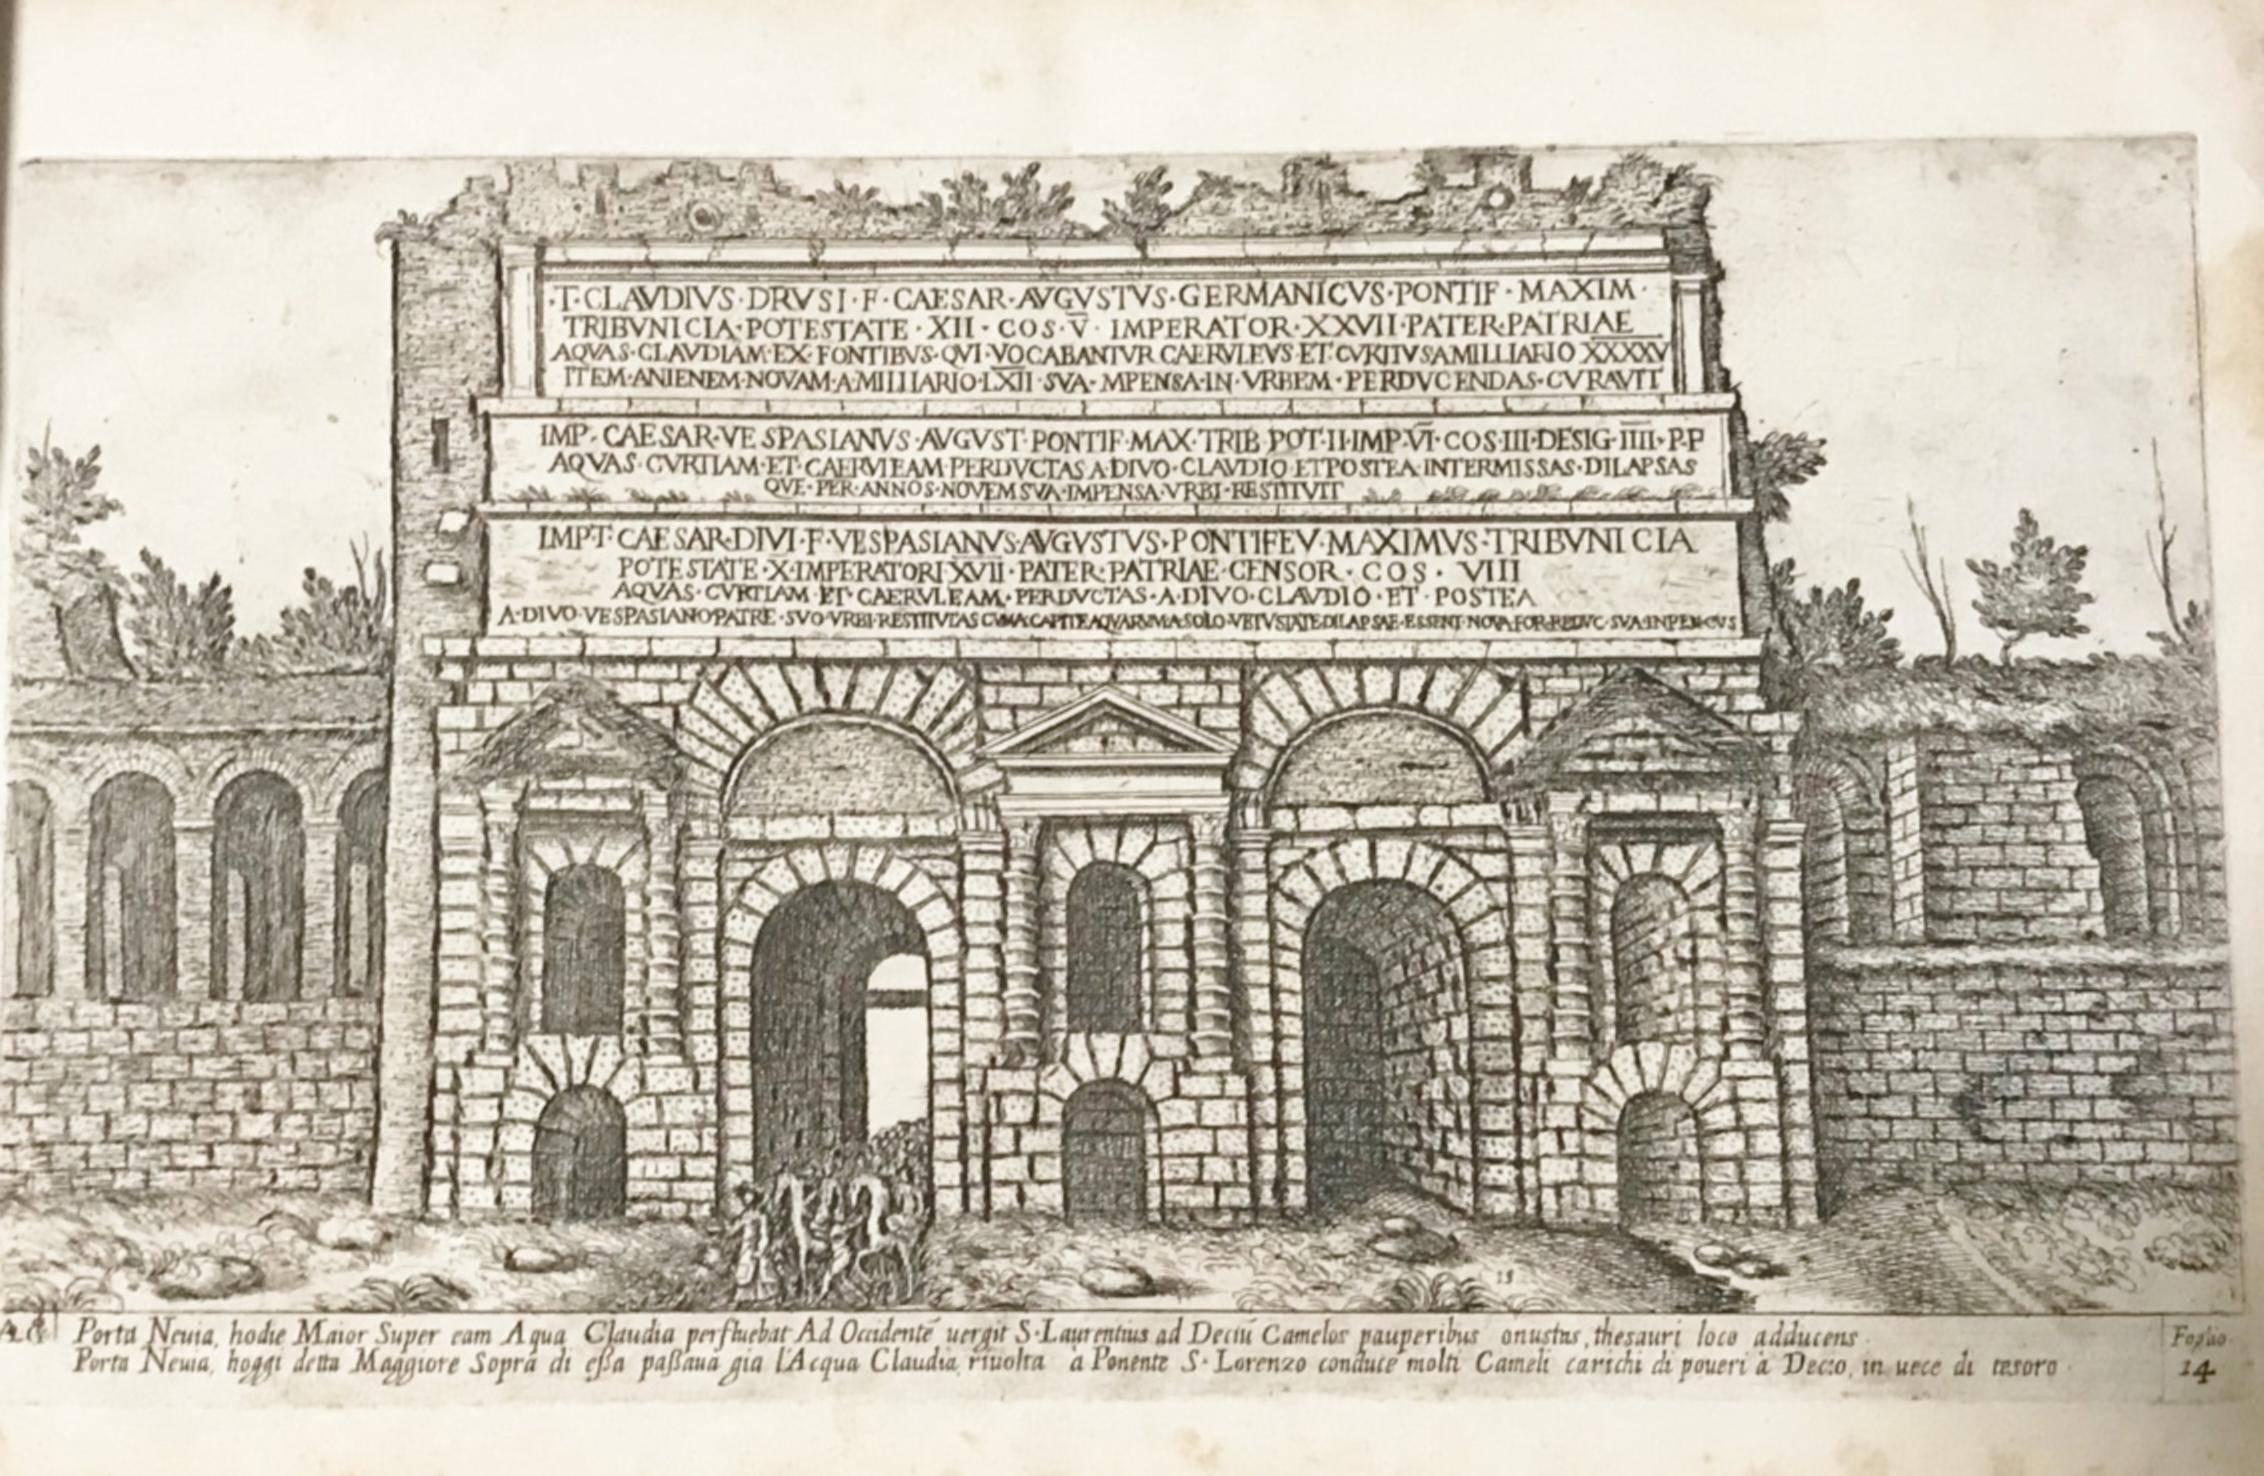 Publisher not identified, roma, dated probably 1616. Vol In-Folio. Dimensioni : 26,7 x 3 x 42 cm. 106 tables illustrated with the etching technique and showing Roman ruines, temples, churches, buildings and other antiquities of the city. Later hard